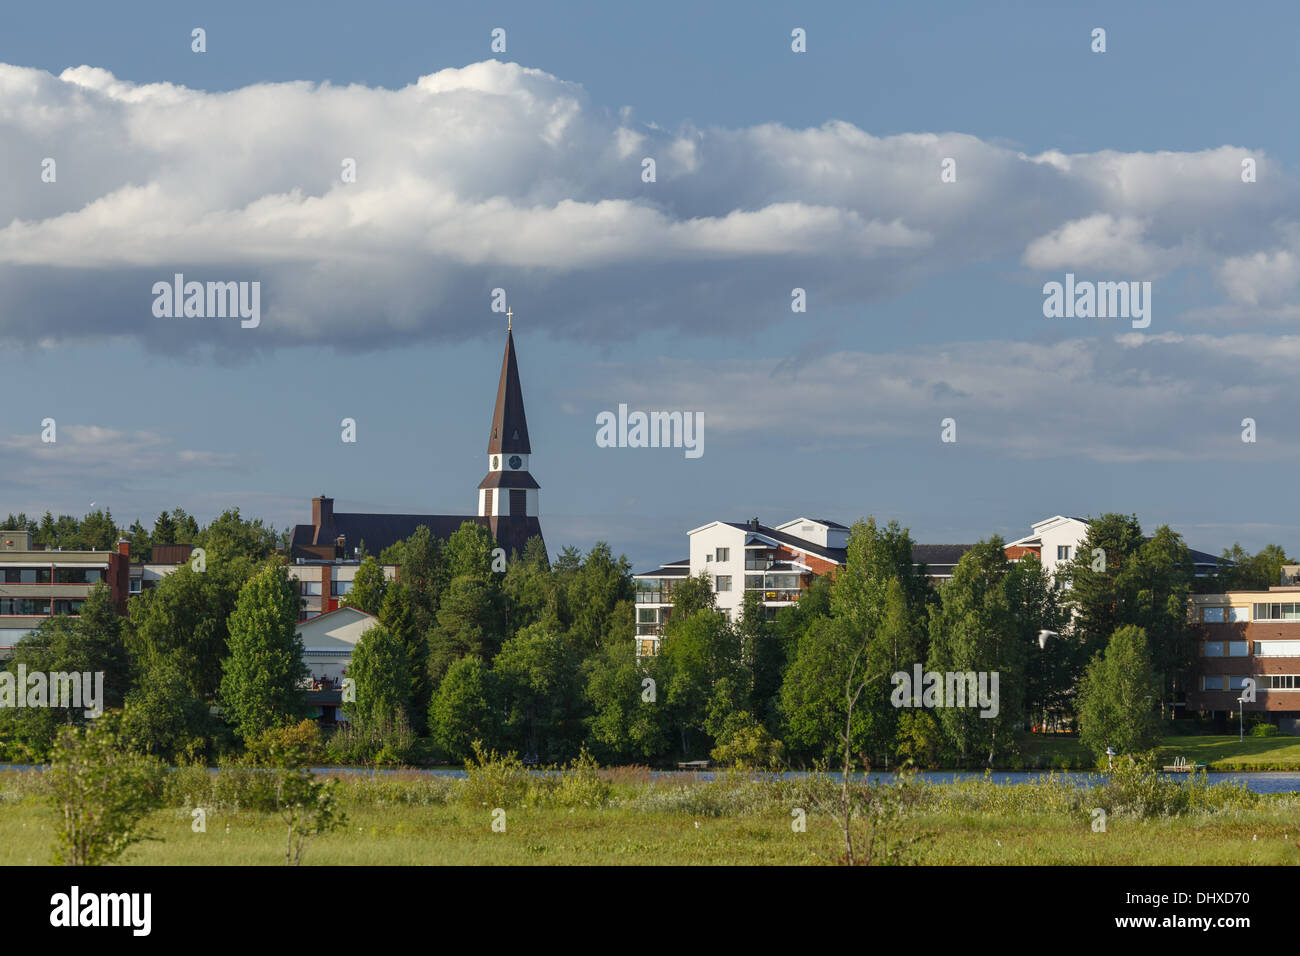 The Lutheran Church of Rovaniemi is a dominant landmark that stands out in the skyline of this city by the Arctic Circle. Stock Photo